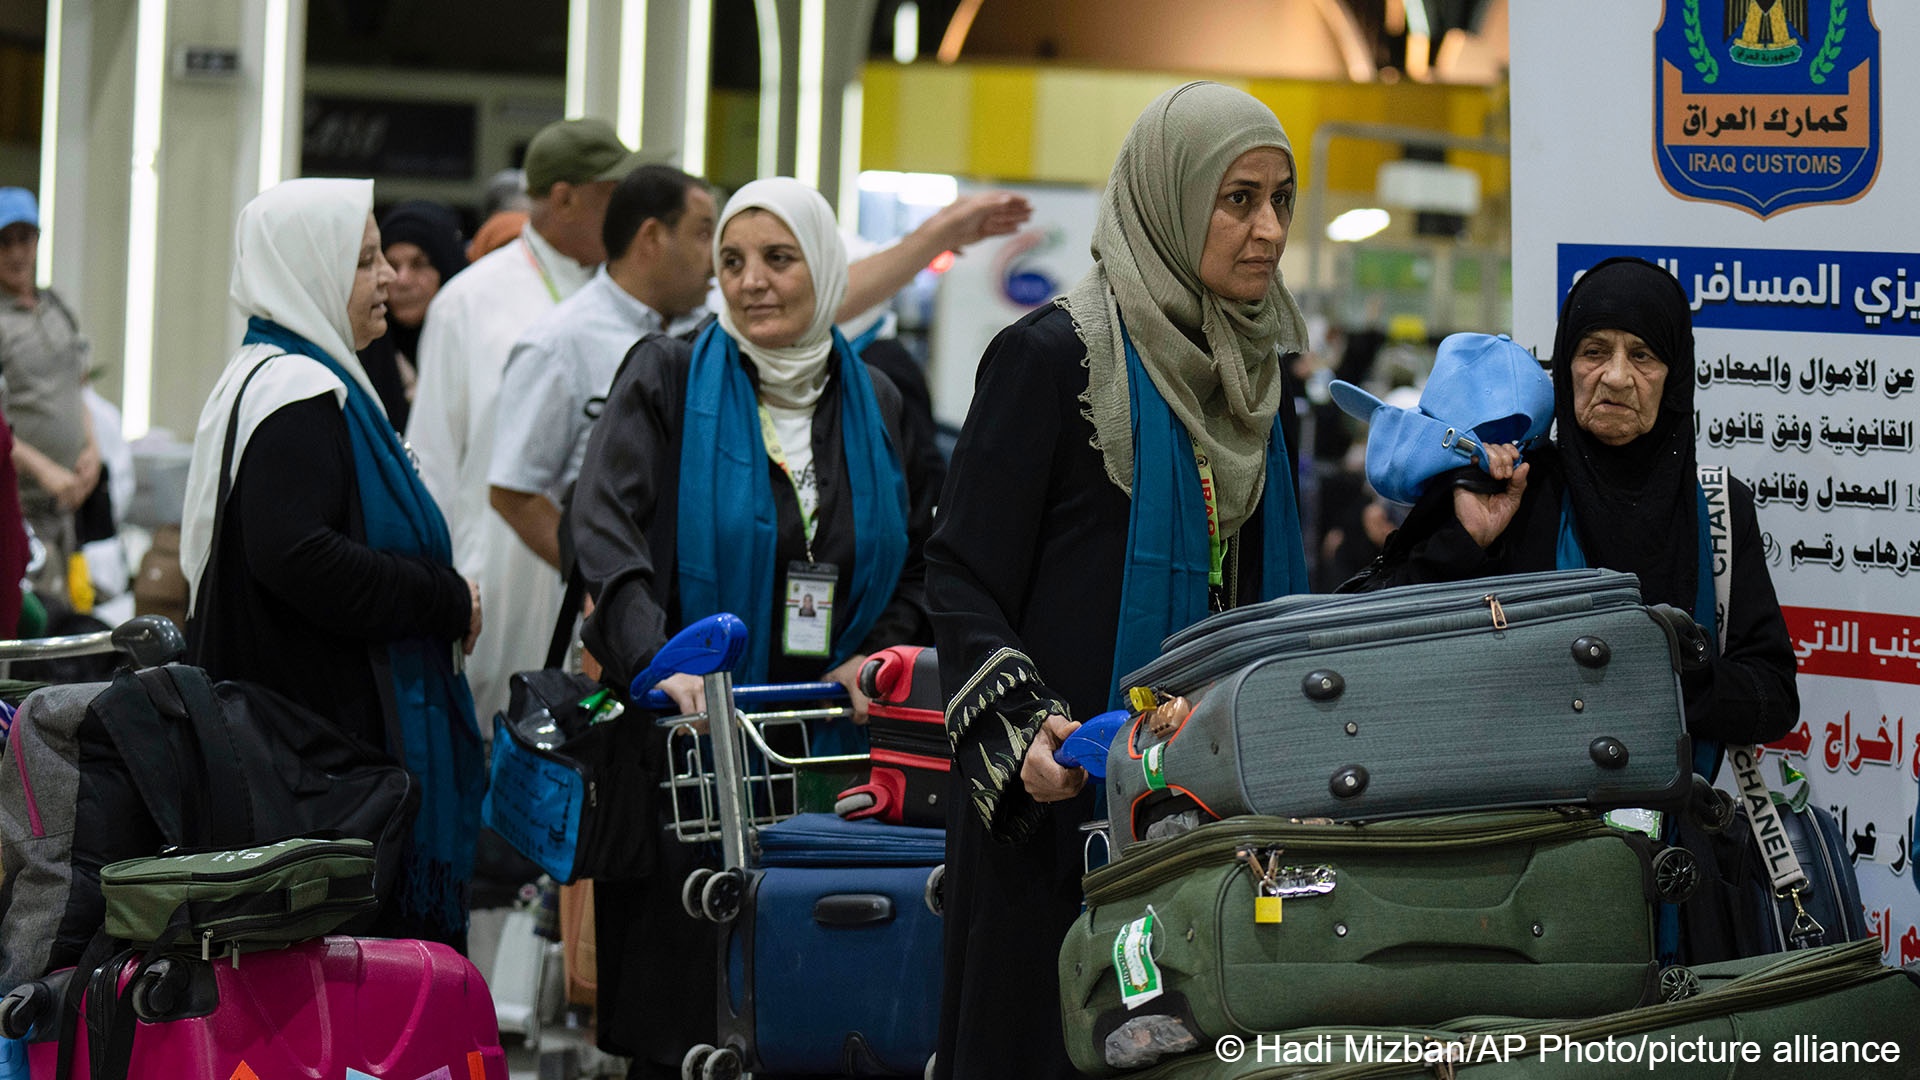 Iraqi pilgrims are heading to Mecca for Haj, the holiest place in Islam, at the Baghdad Airport in Baghdad, Iraq, 7 June  2023 (image: AP Photo/ Hadi Mizban)